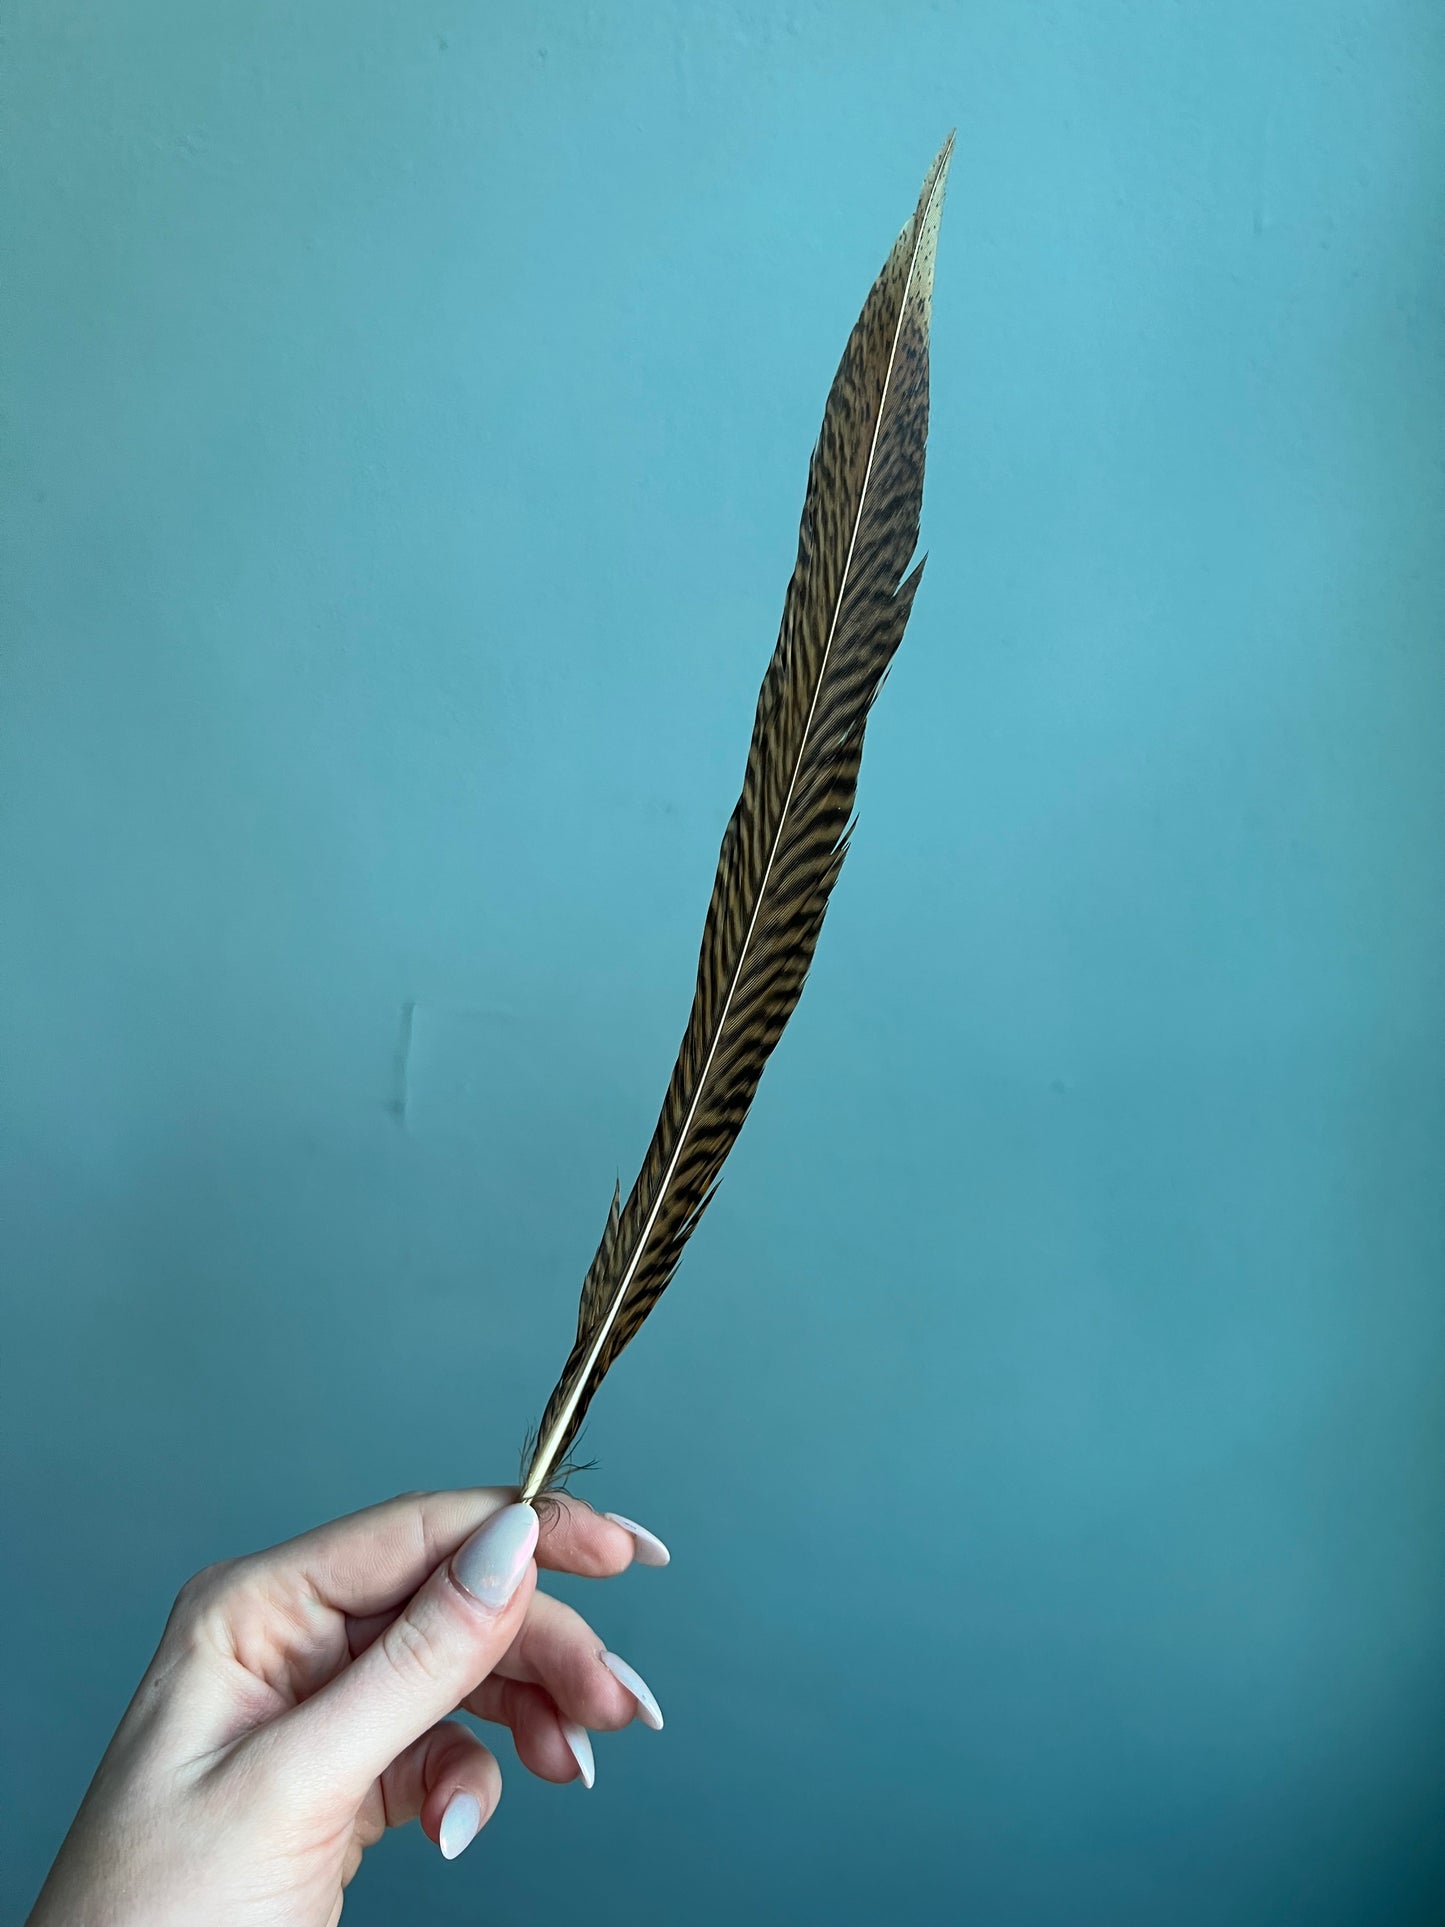 The Large Feathers